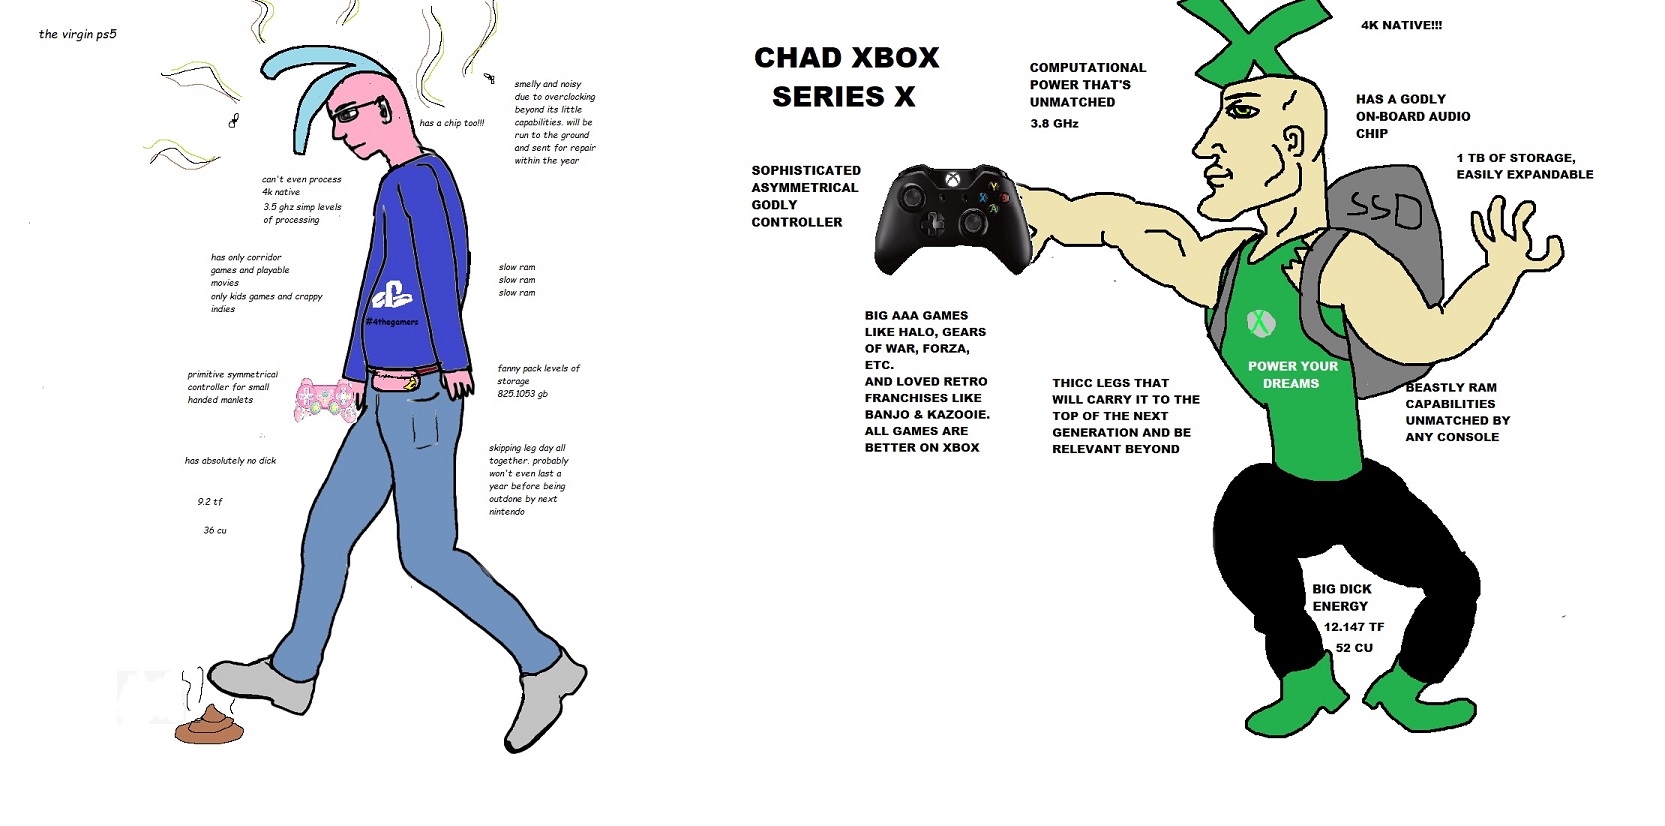 This is not an anti-gamer post, so please don’t think you're being attacked. I don’t give a shit what console you play, I’m just here to place you into stereotypical categories based on nothing but my own predispositions. With that said, PS5 is for virgins and Xbox is for Chads, end of discussion. 
